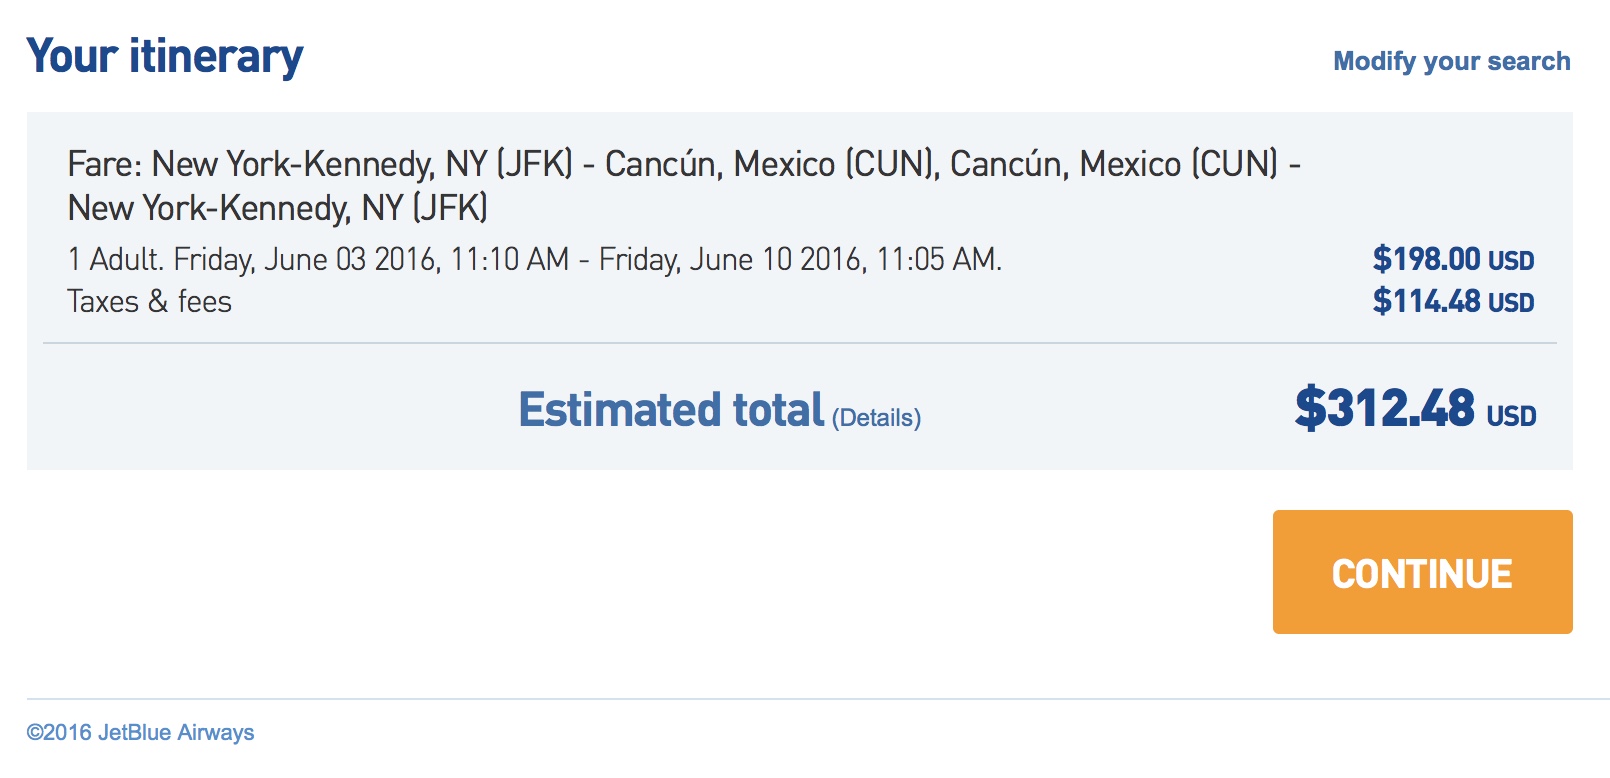 JFK to CUN for $315